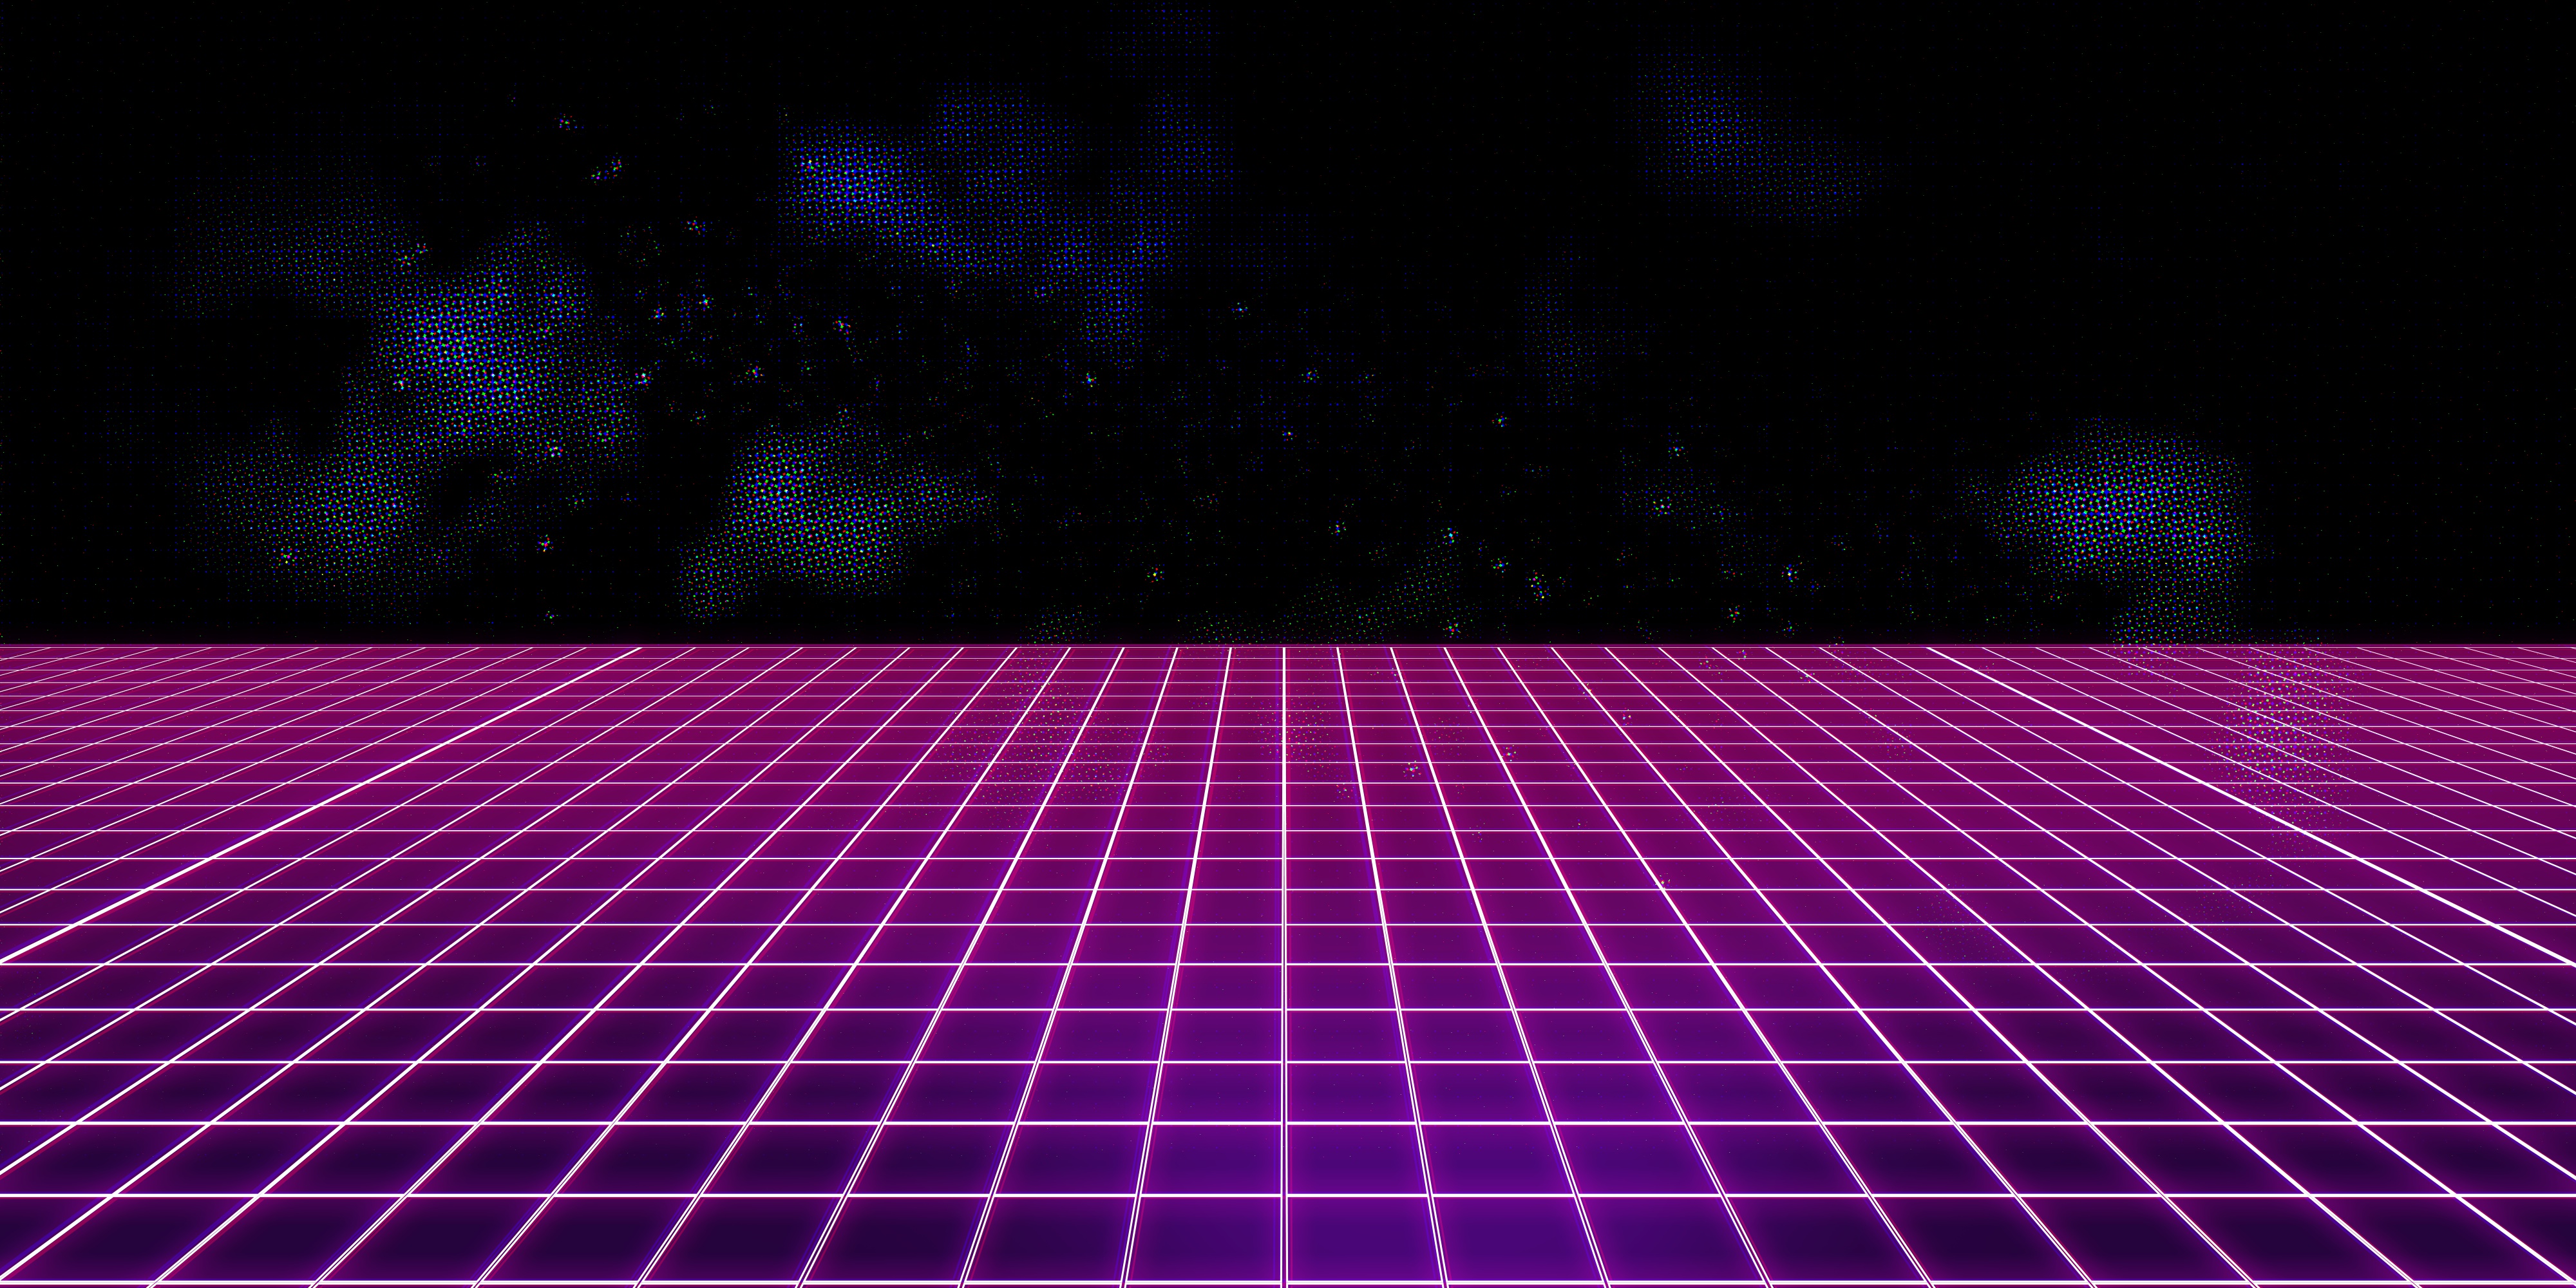 Retrowave Synthwave Neon Pink Pattern Square 4000x2000